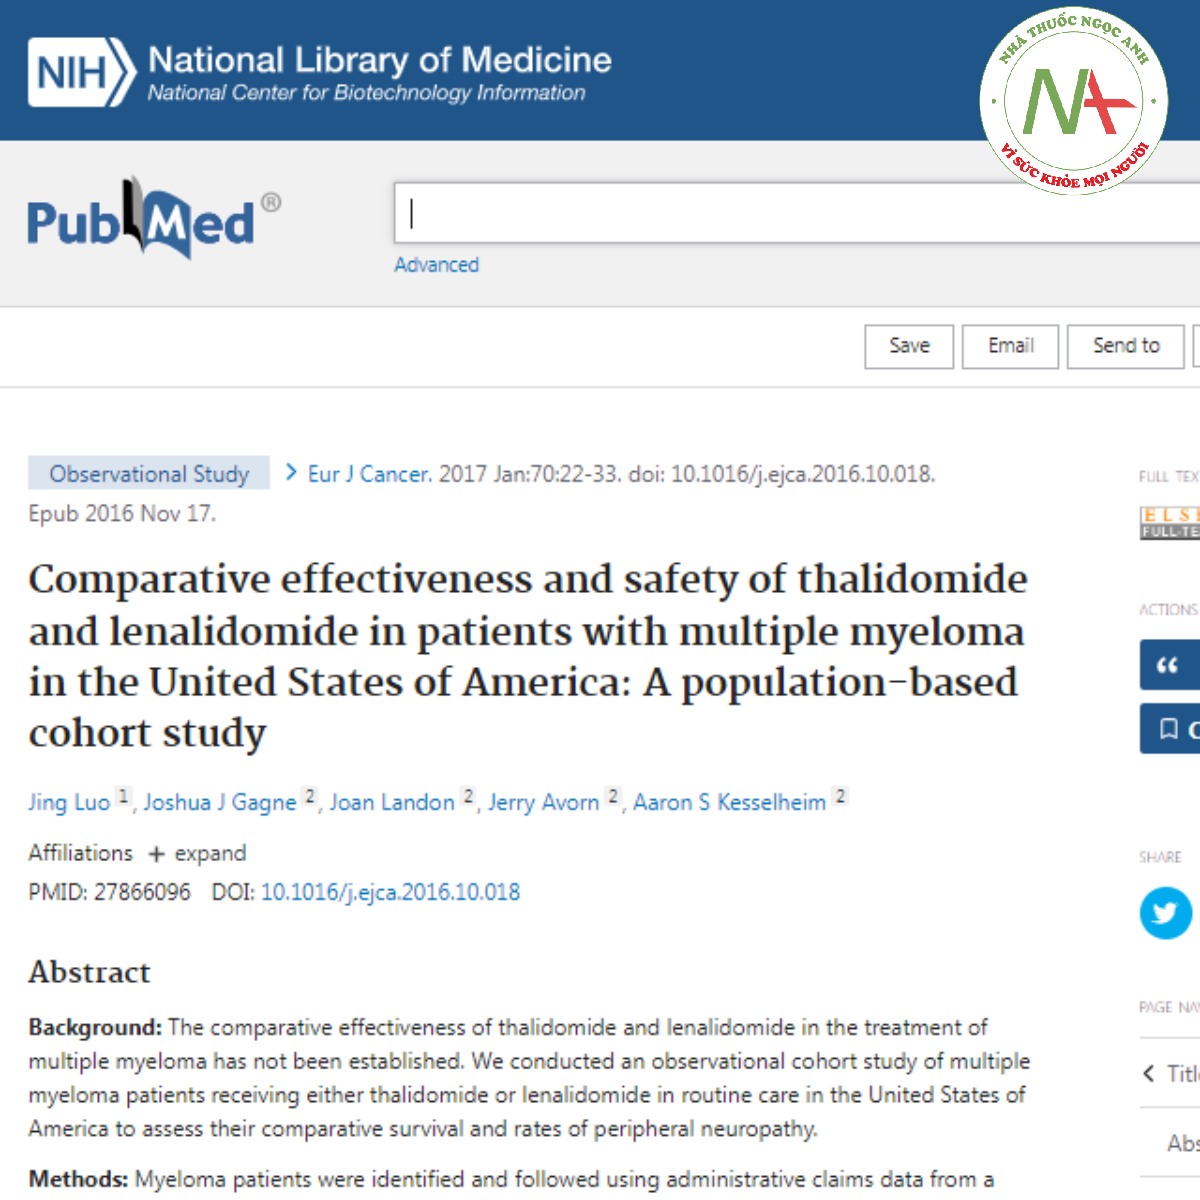 Comparative effectiveness and safety of thalidomide and lenalidomide in patients with multiple myeloma in the United States of America: A population-based cohort study